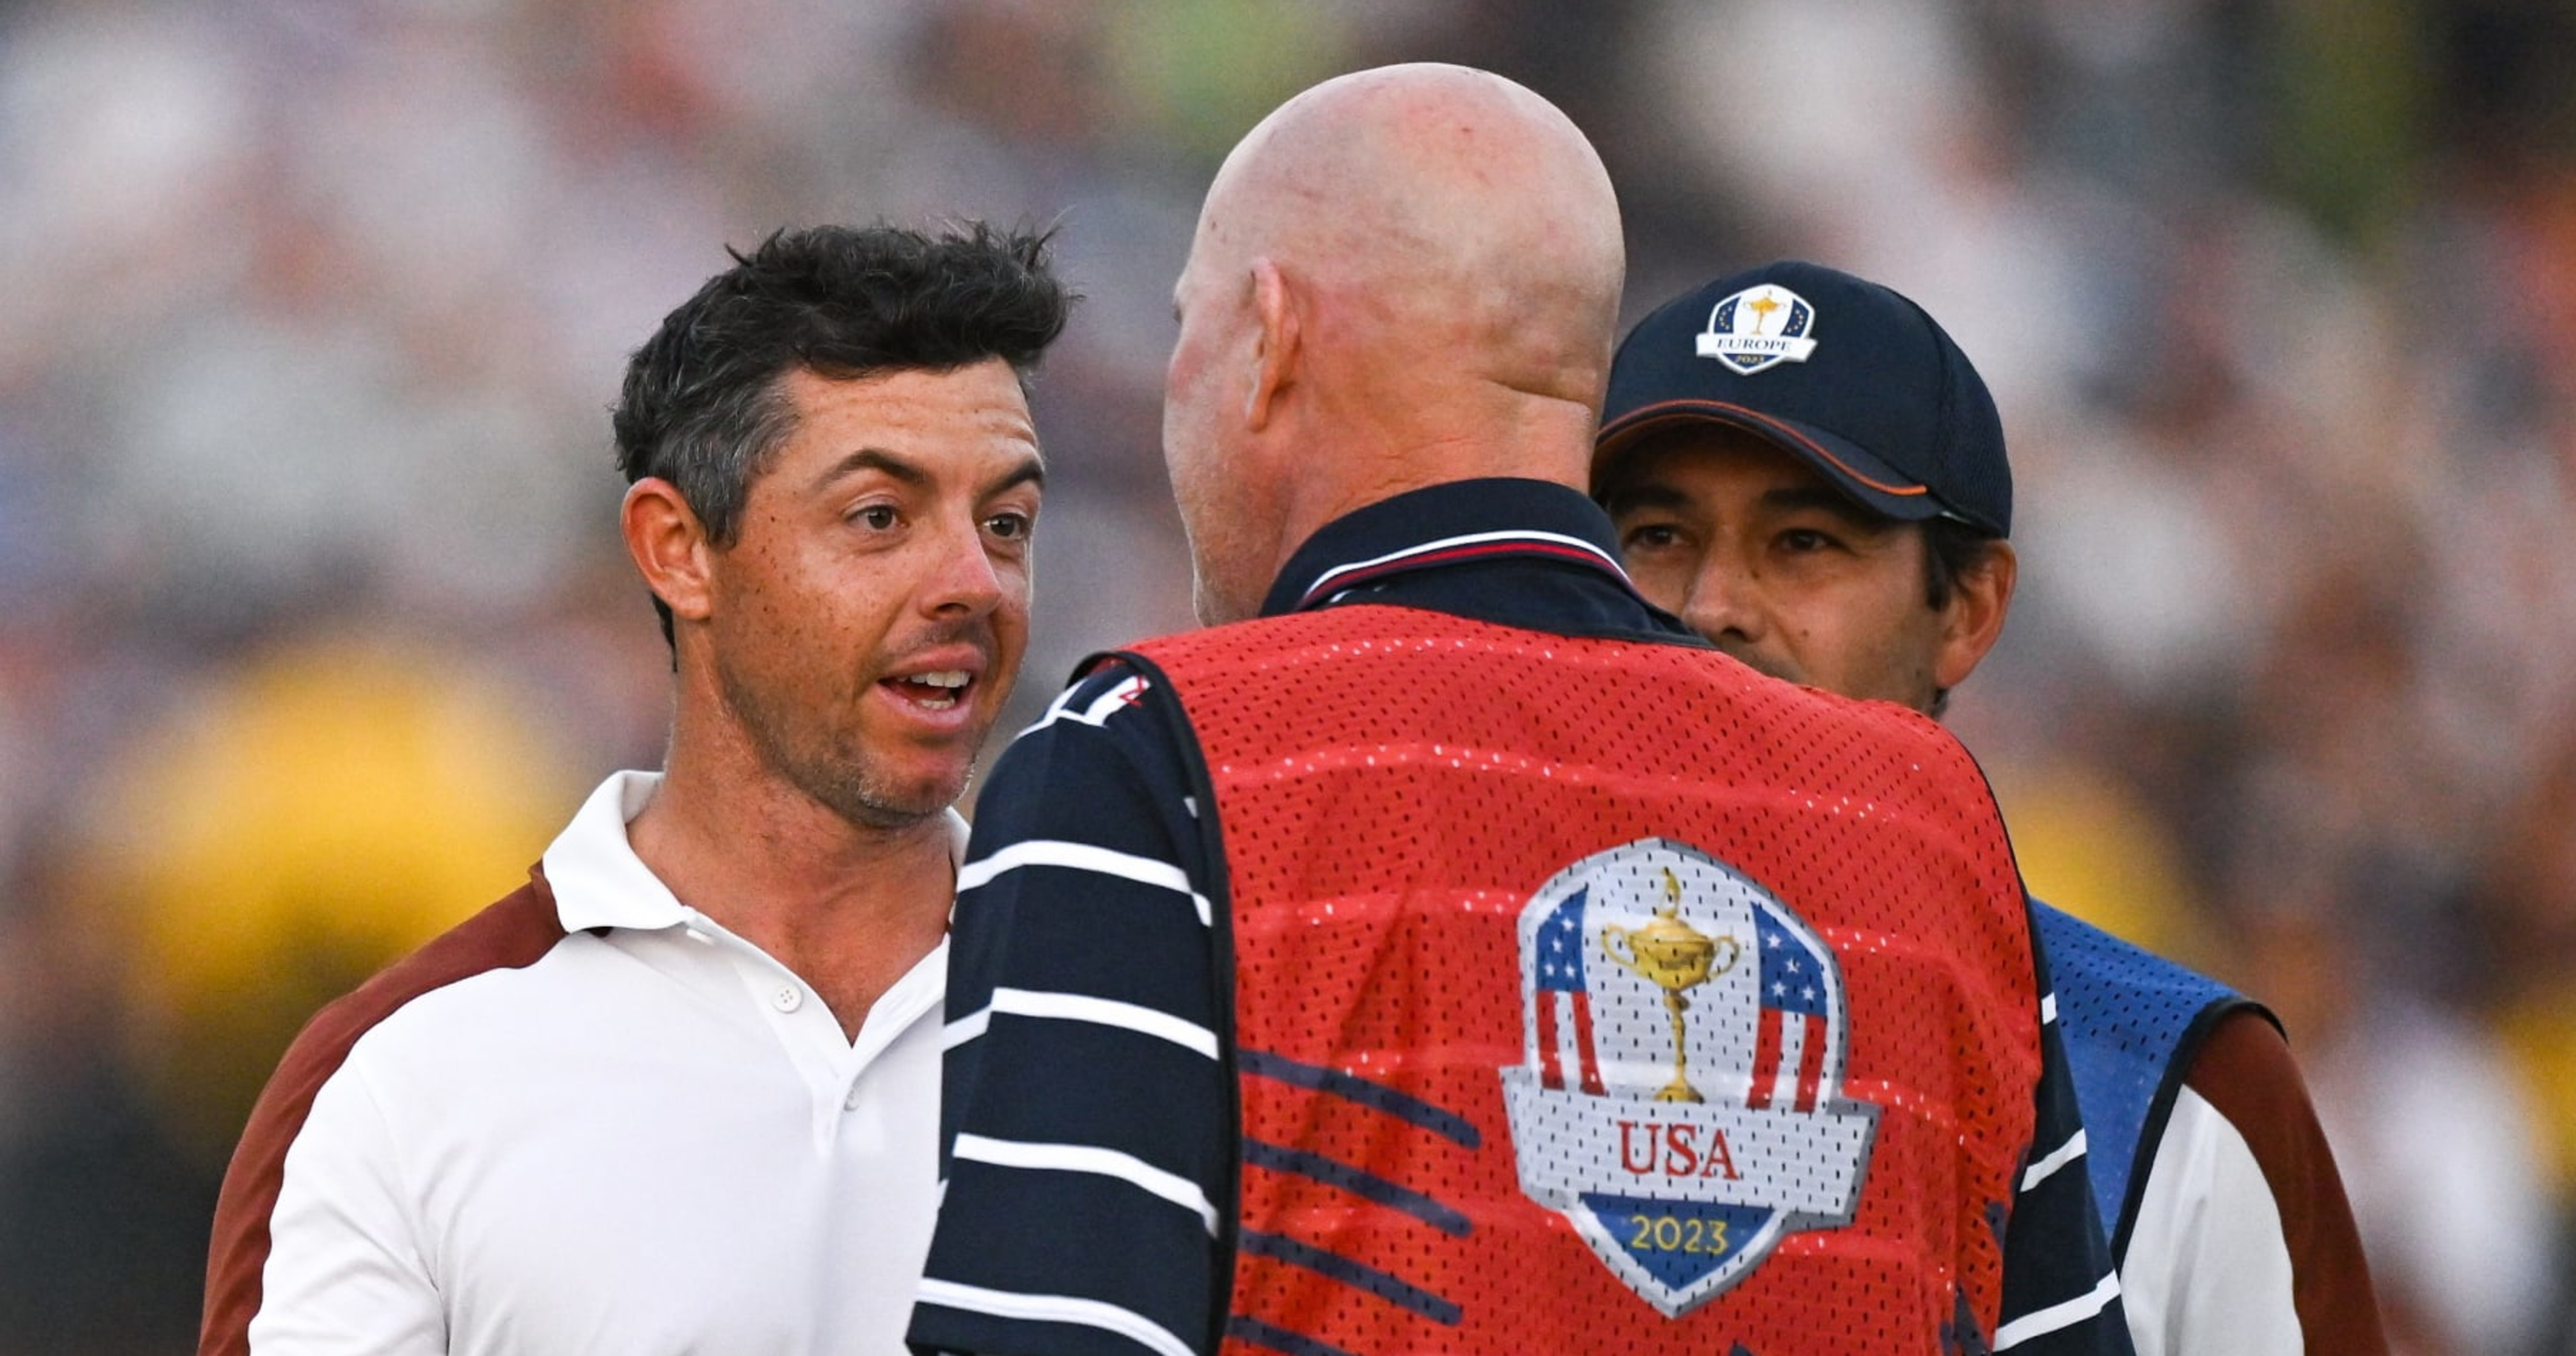 Rory McIlroy Has Heated Ryder Cup Confrontation With USA Caddie Joe